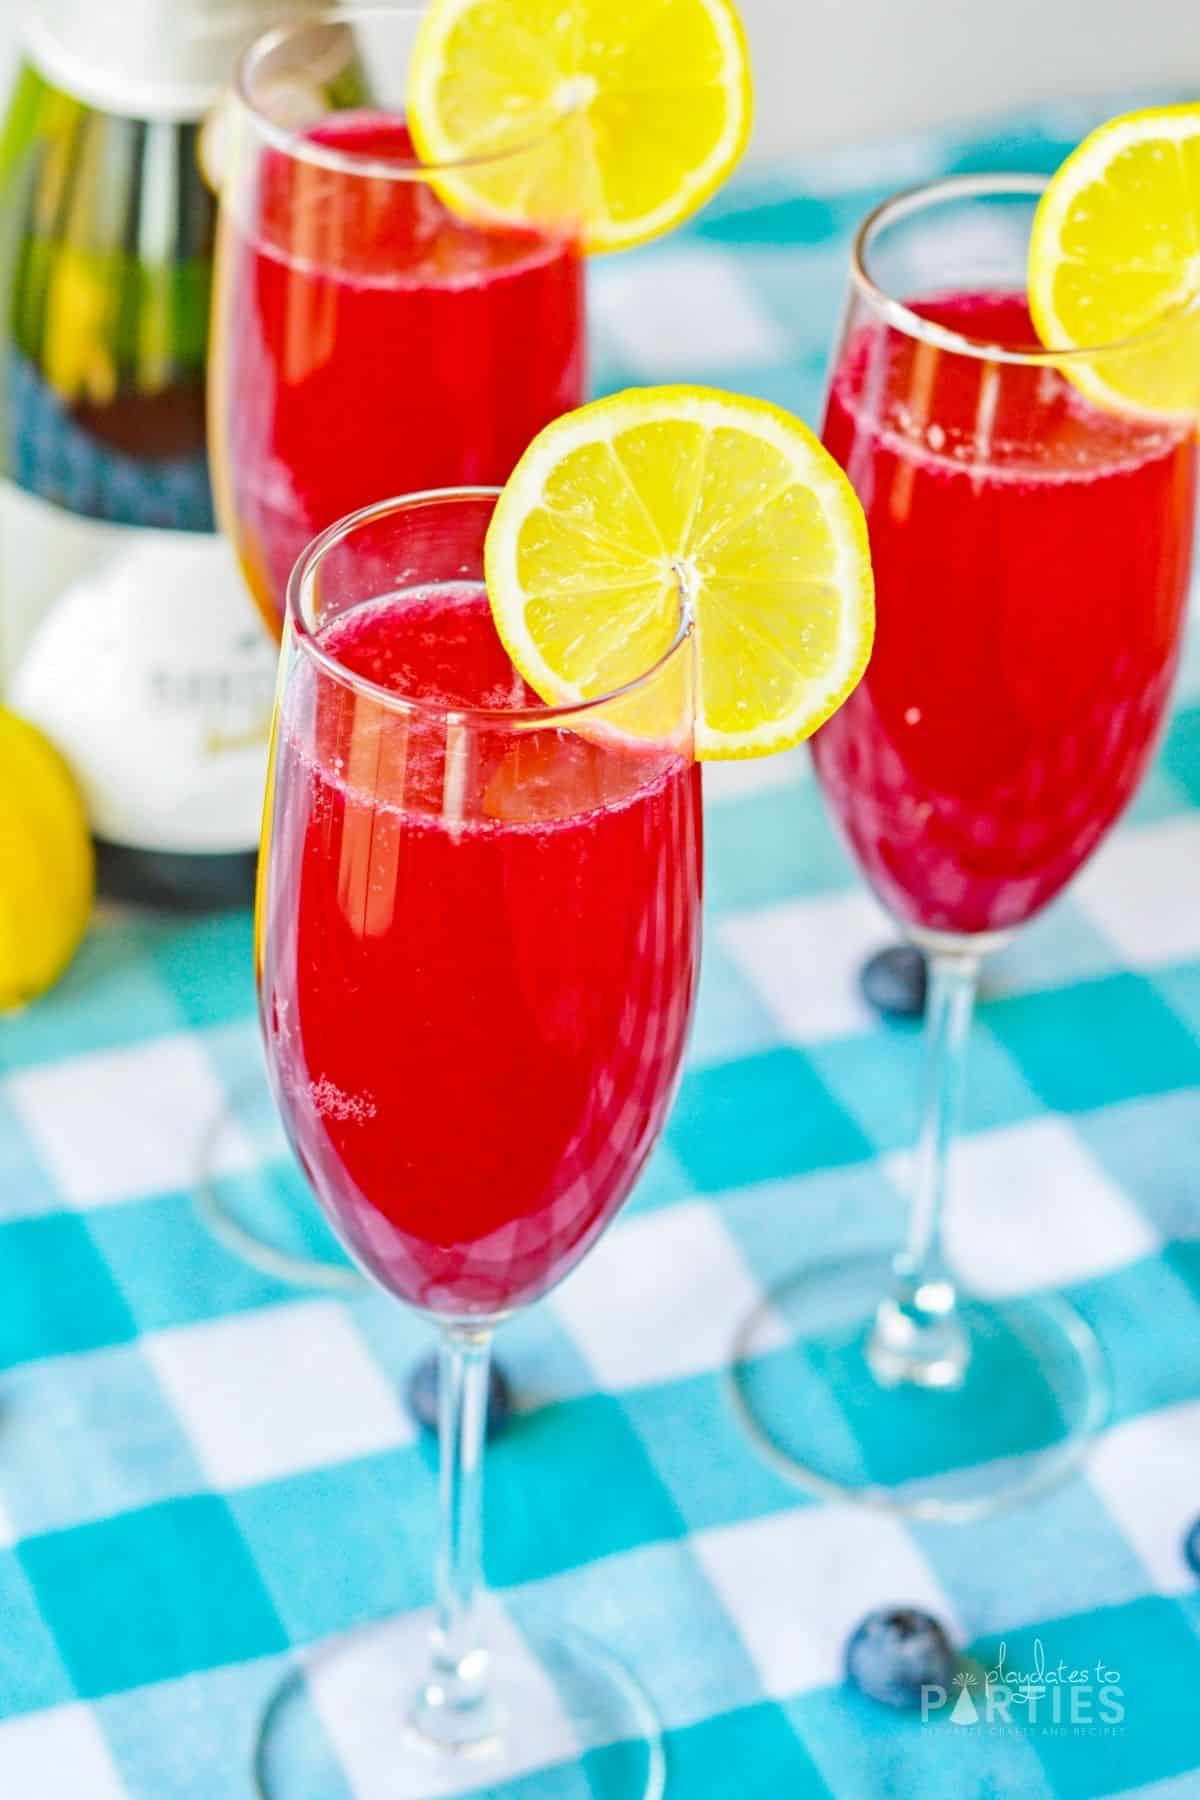 Blueberry lemonade mimosas garnished with lemon slices next to a bottle of champagne.